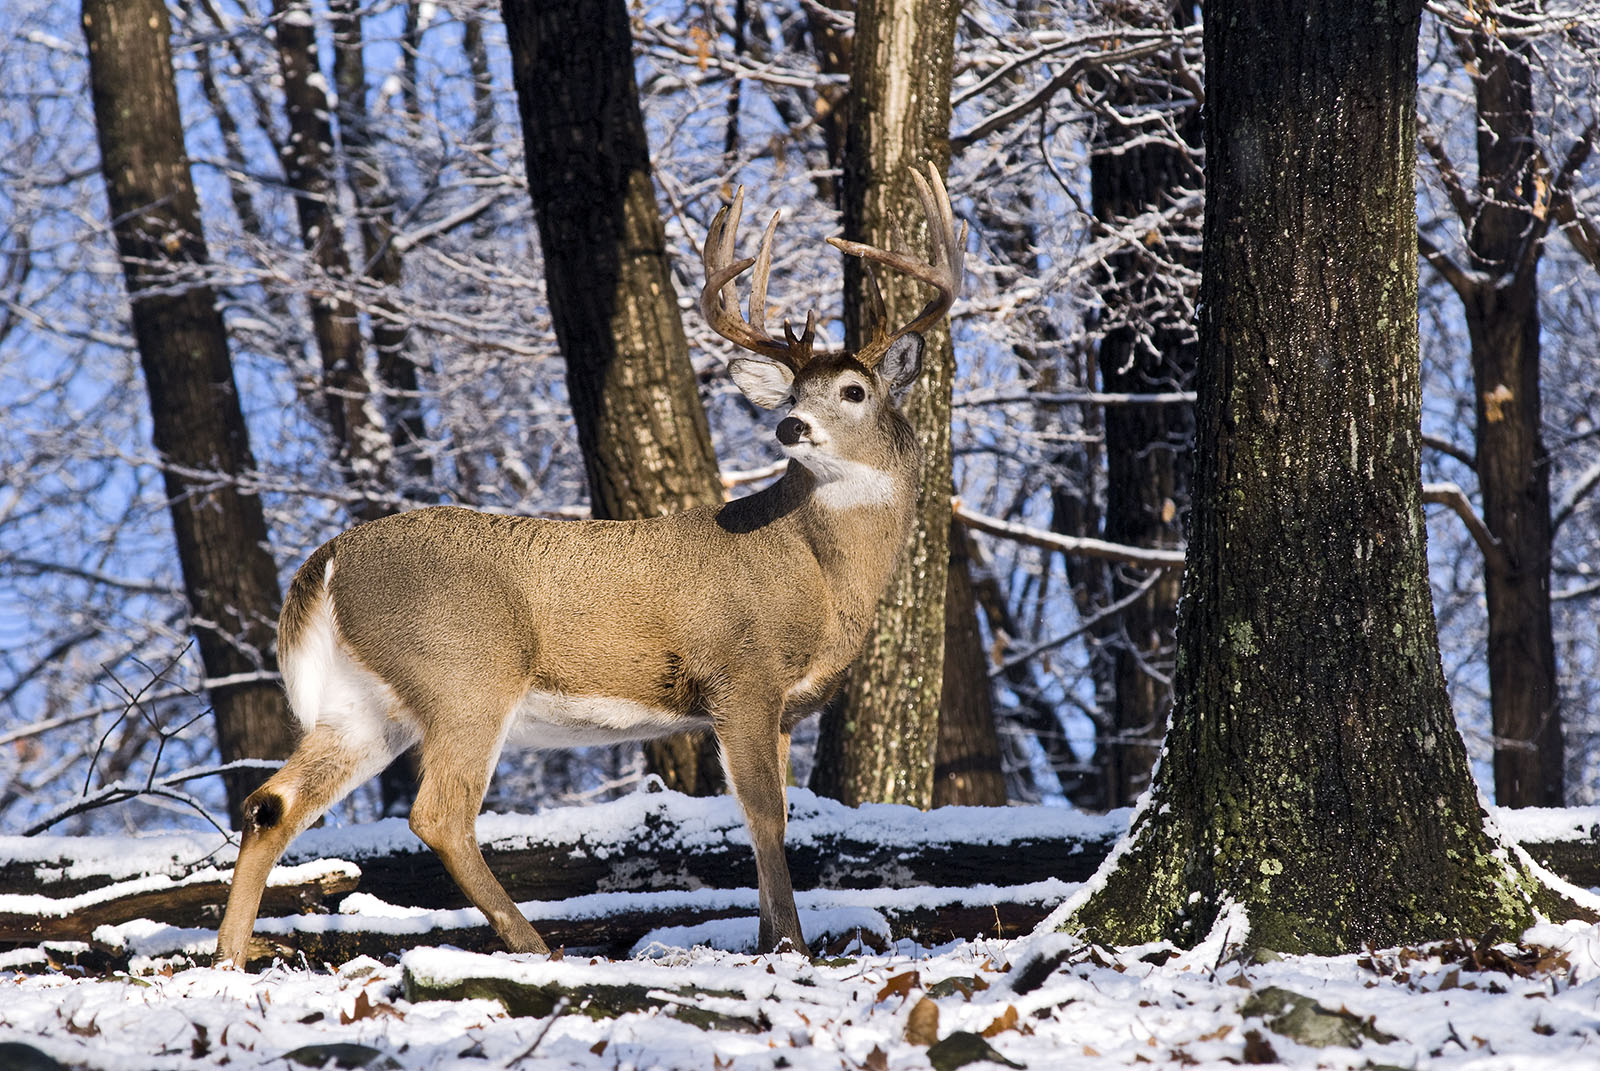 A photo of a large whitetail buck in a snowy forest.